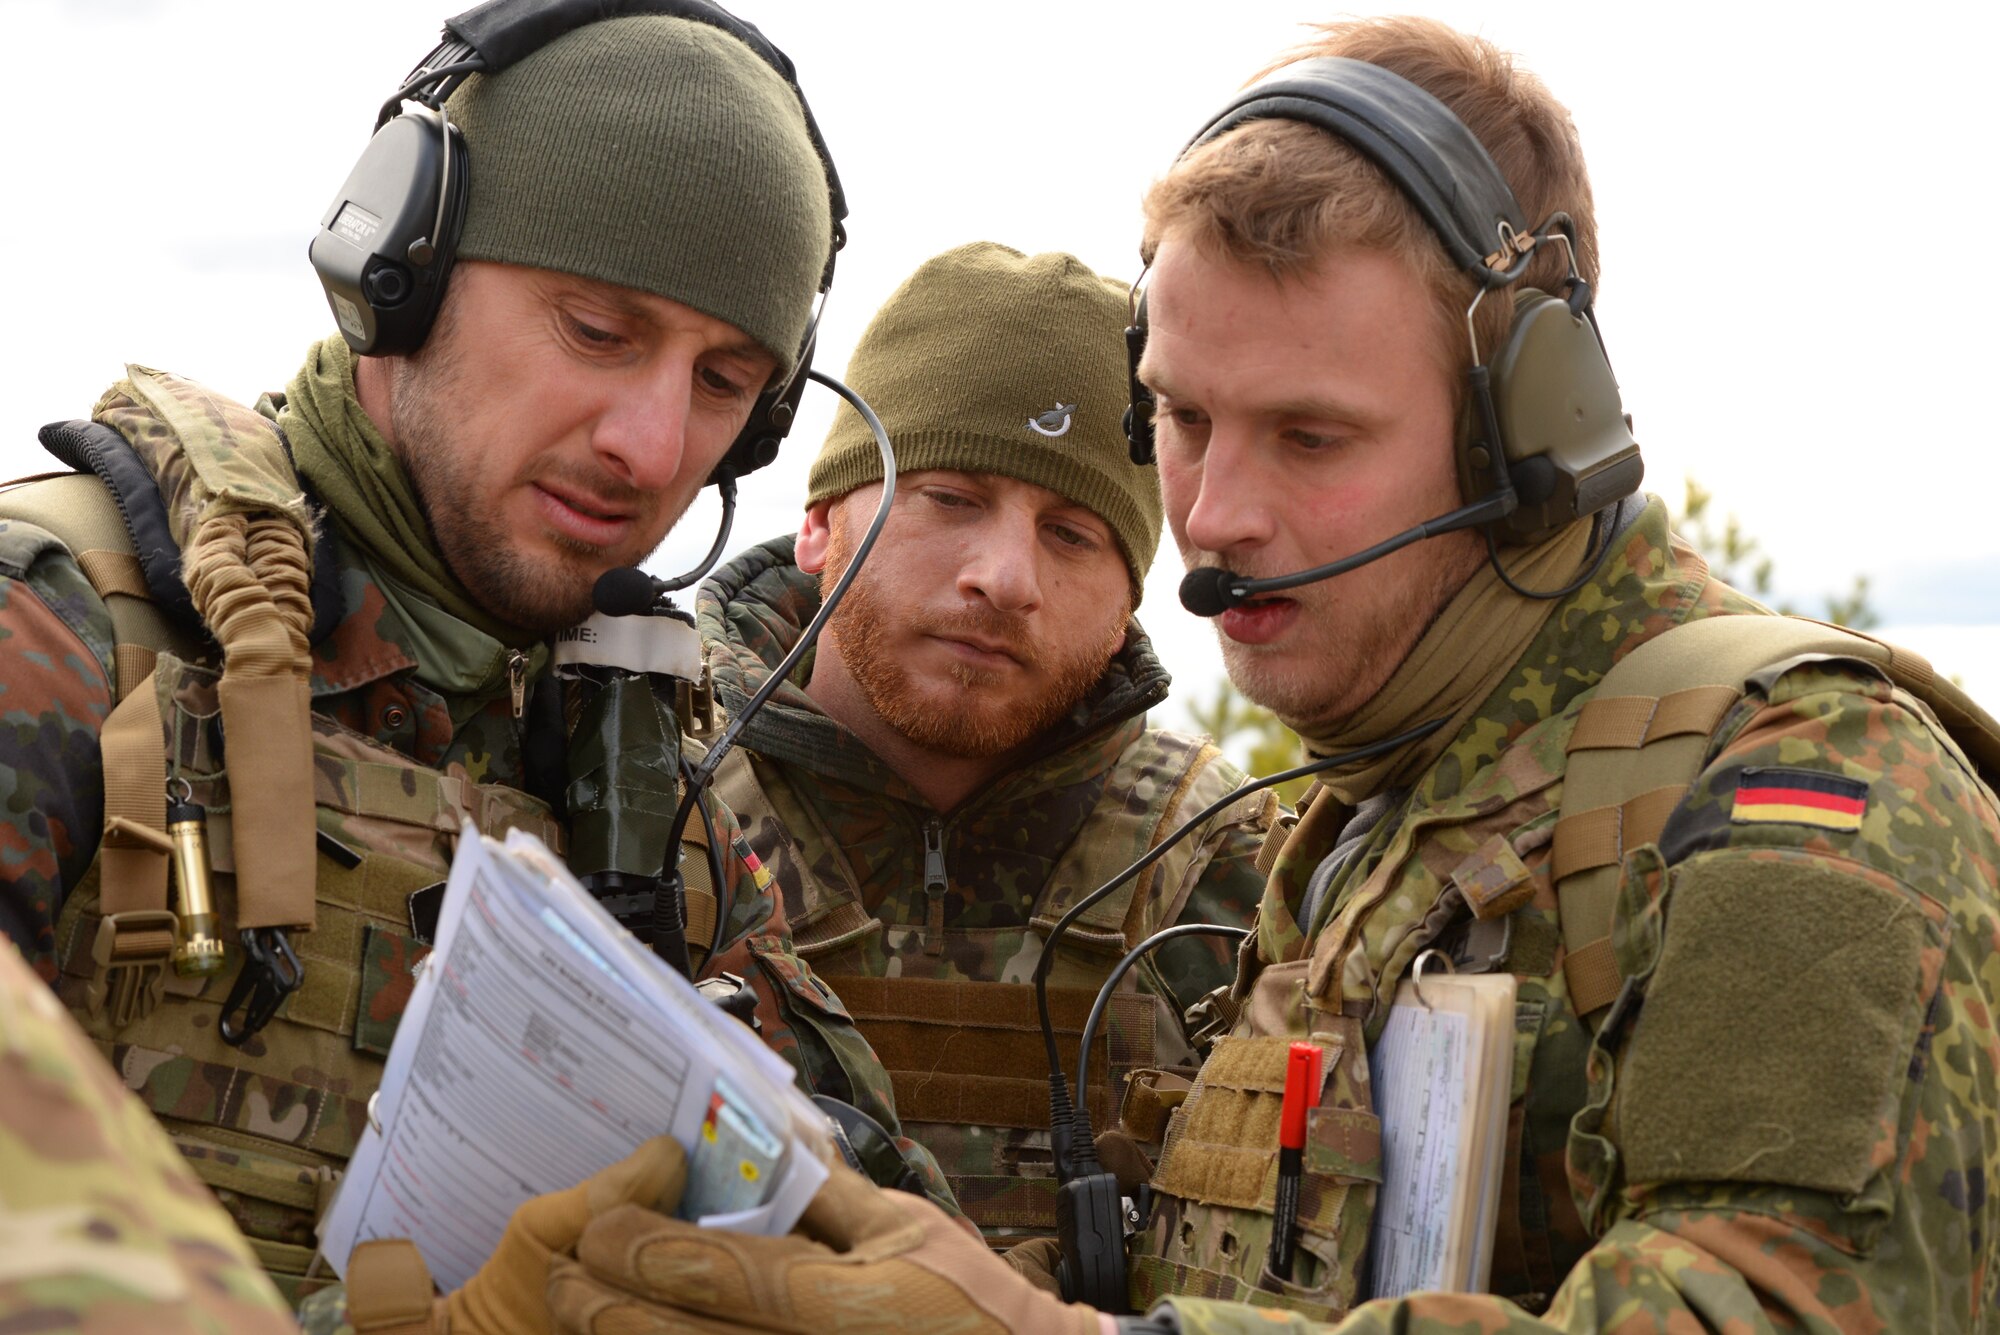 A picture of German armed forces Joint Terminal Attack Controllers (JTACs) 1st Lt. Marius Sokol, Capt. Sebastian Pflueger and 2d Lt. Michael Barthel, performing close air support training.